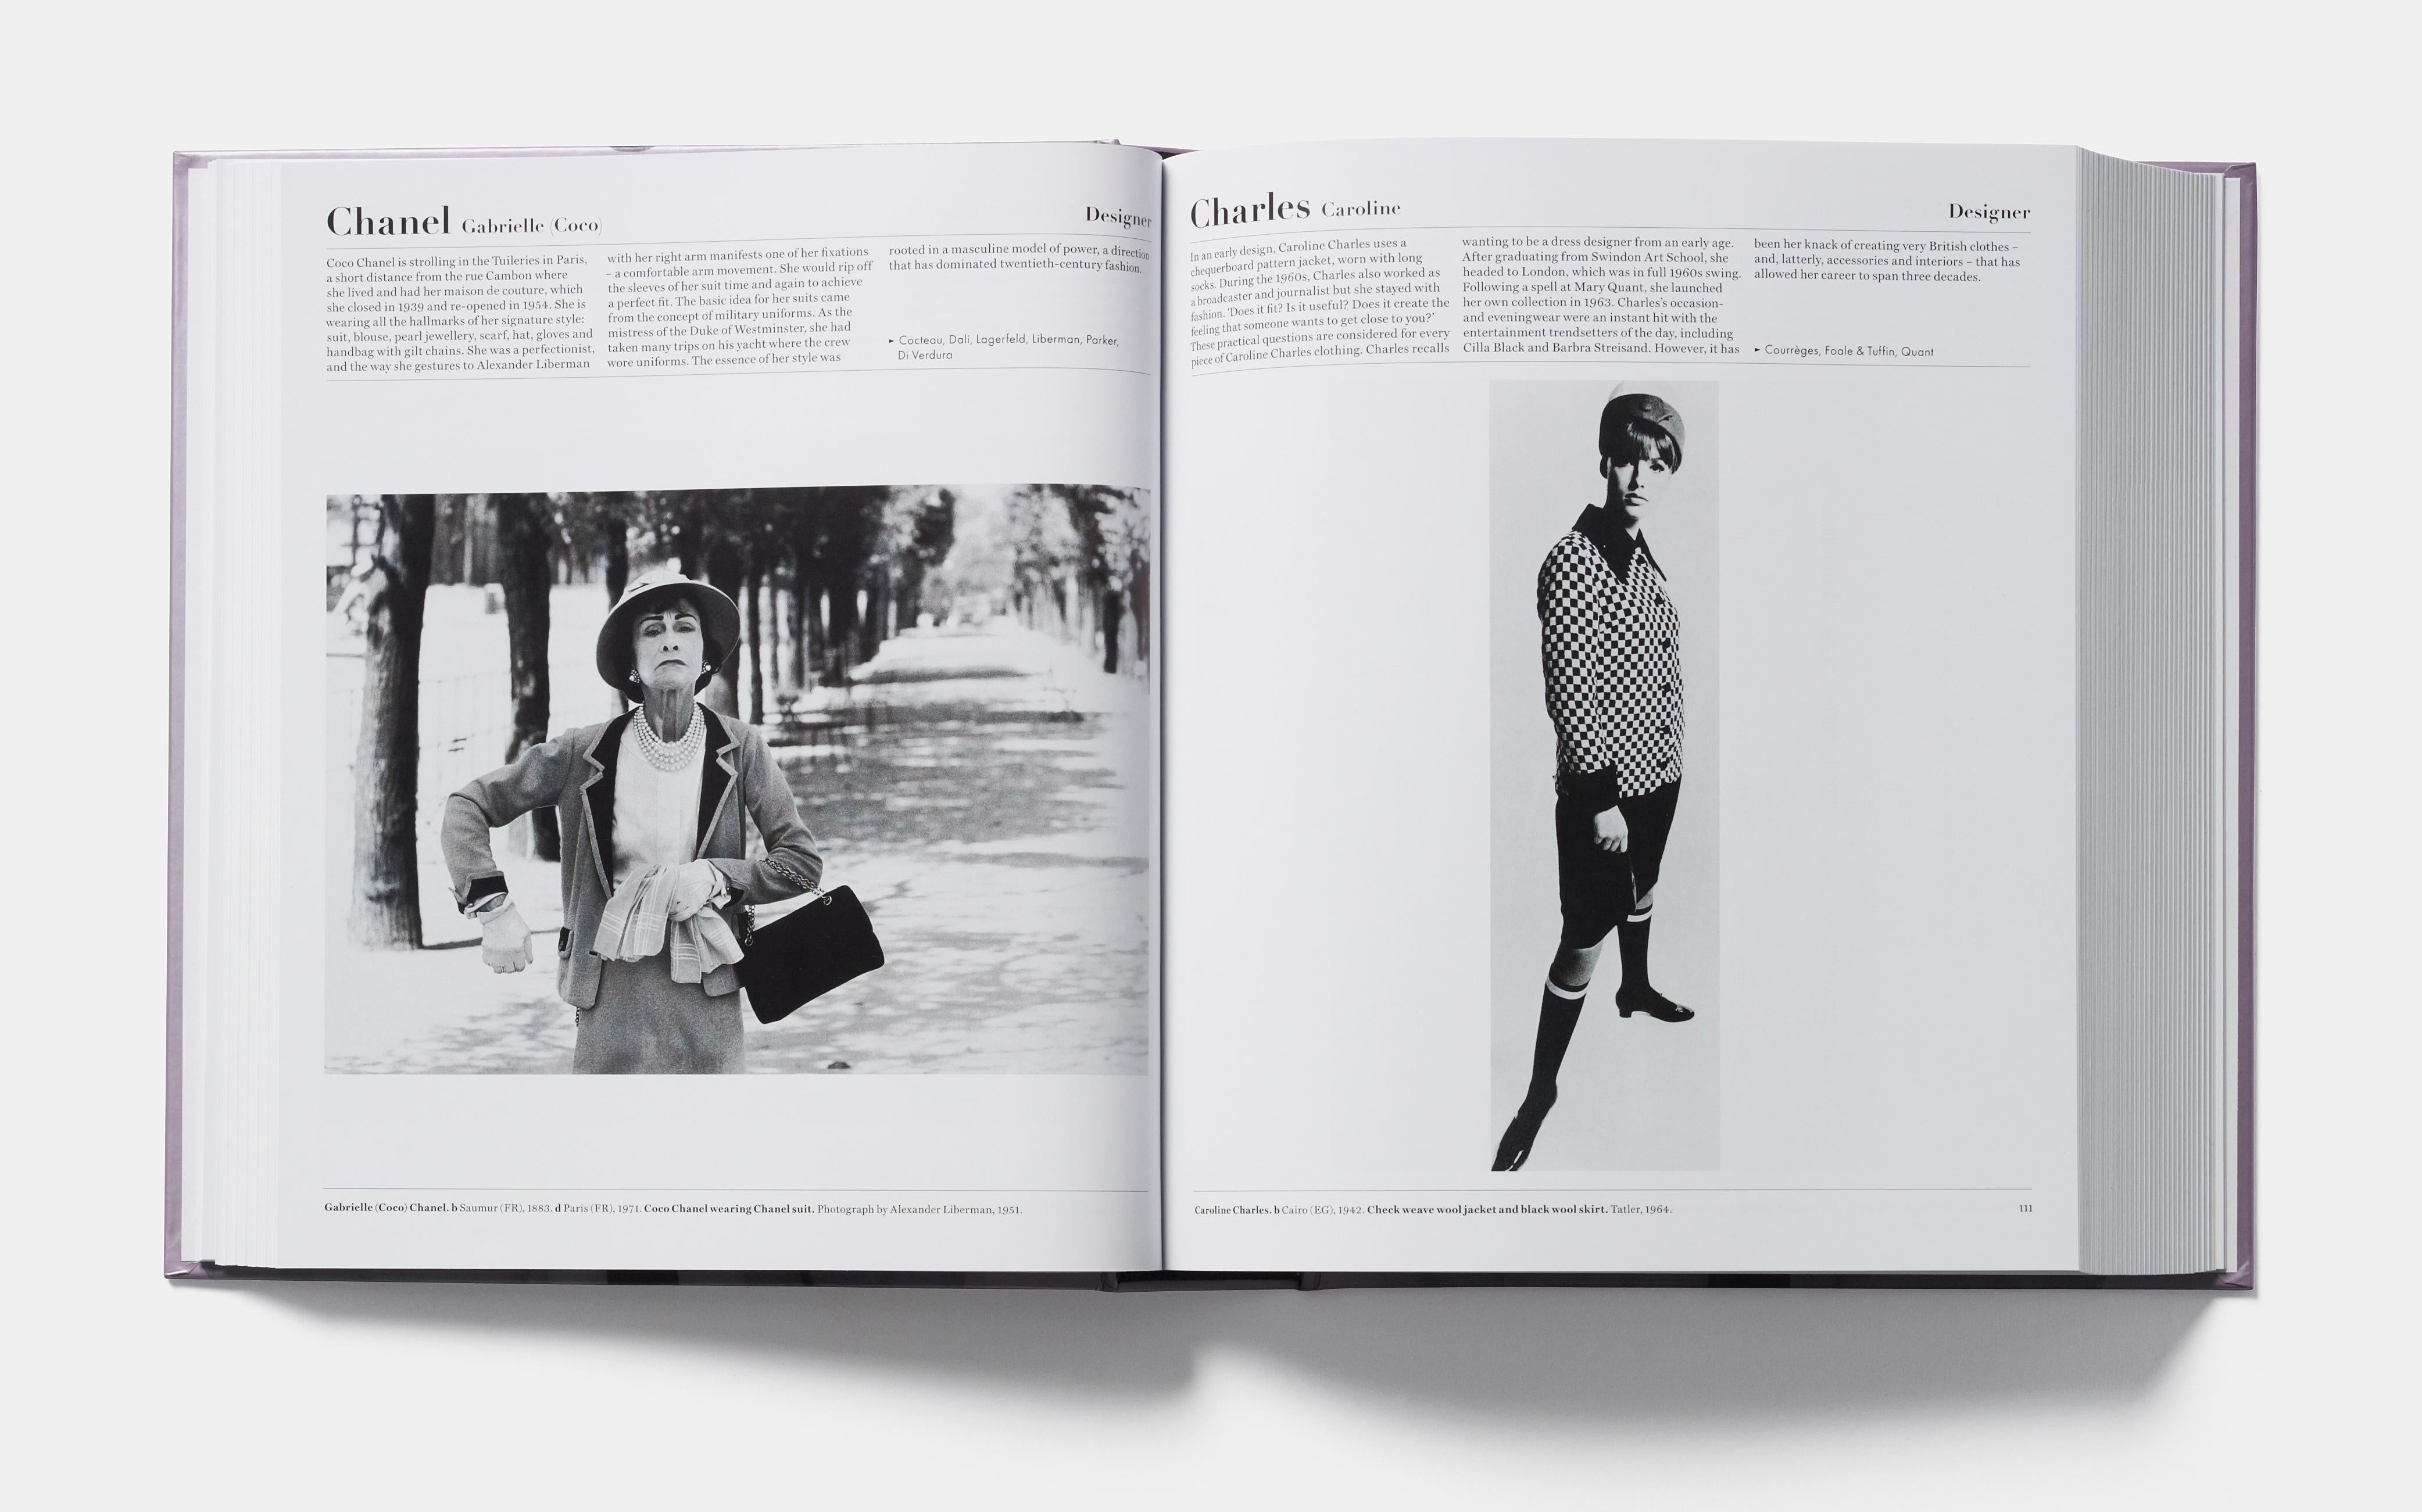 The Fashion Book takes a fresh look at the fashion world and the people who created and inspired it.

Spanning almost 200 years, the entire industry is represented; from clothing and footwear designers, to photographers, stylists, icons and